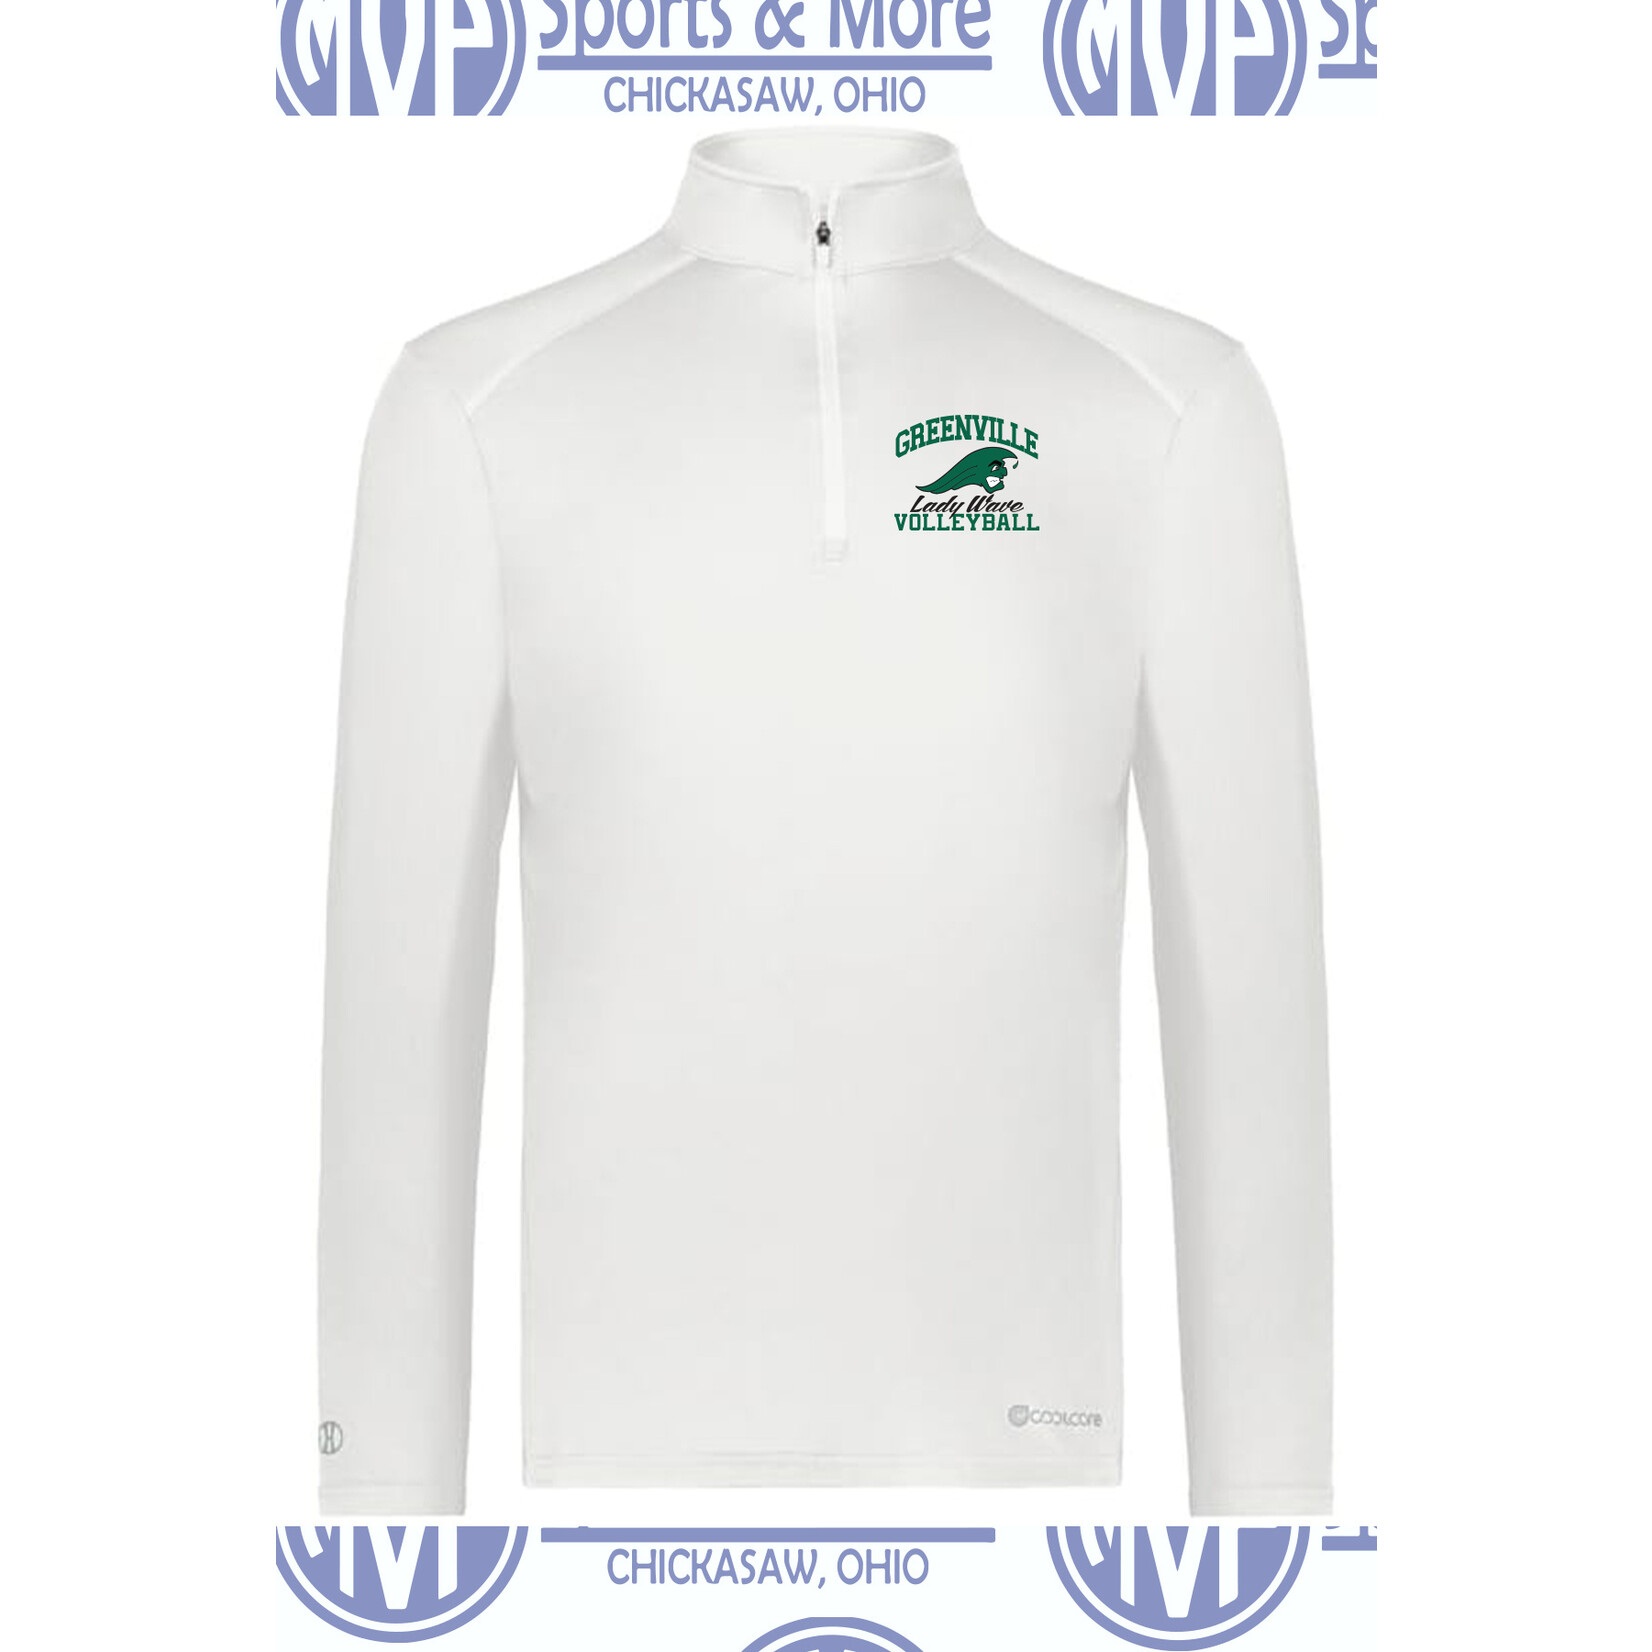 GREENVILLE VOLLEYBALL - YOUTH Electrify Coolcore Pullover 222240